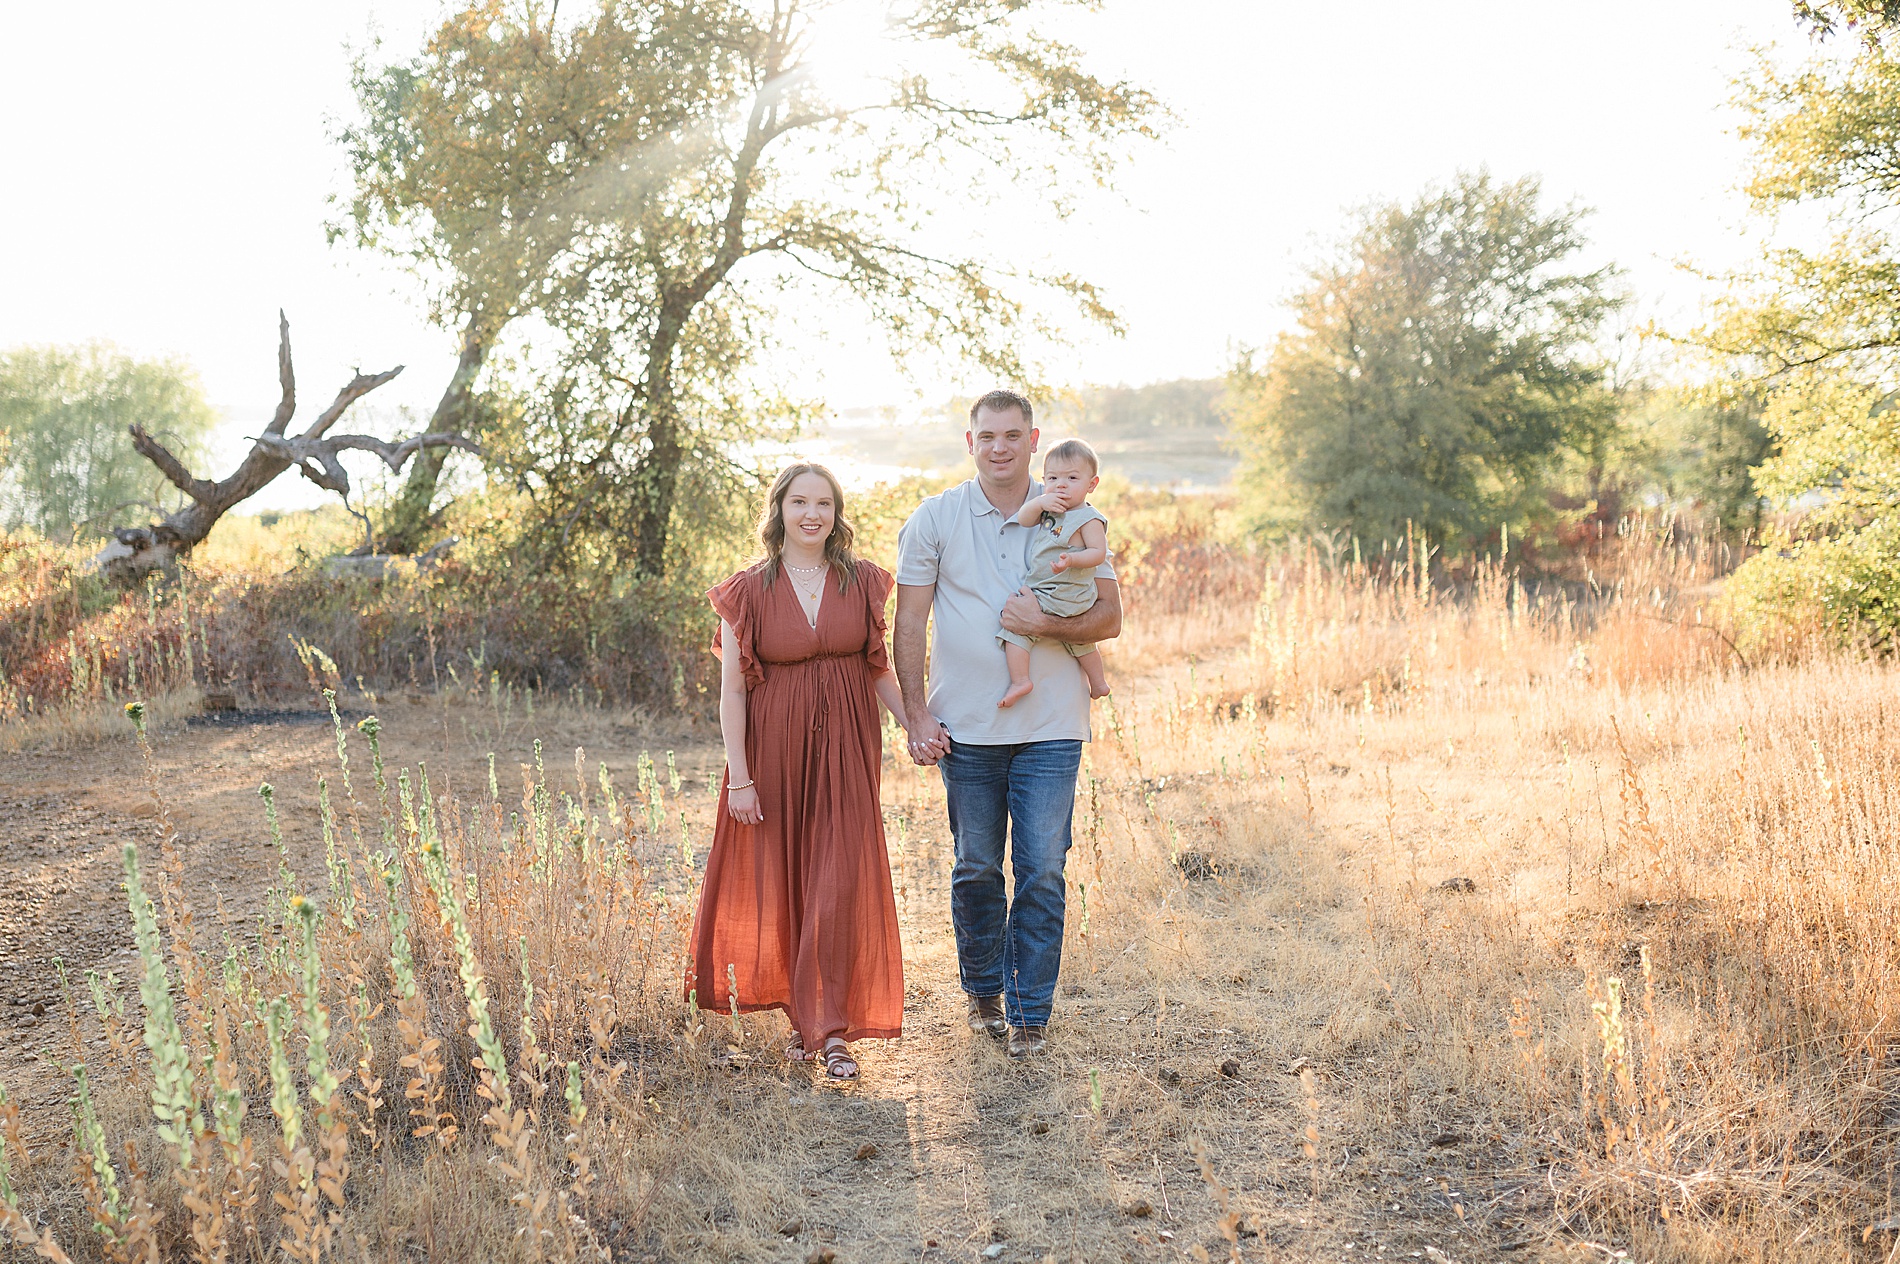 outdoor family portraits taken by Lindsey Dutton Photography, a Dallas newborn photographer
